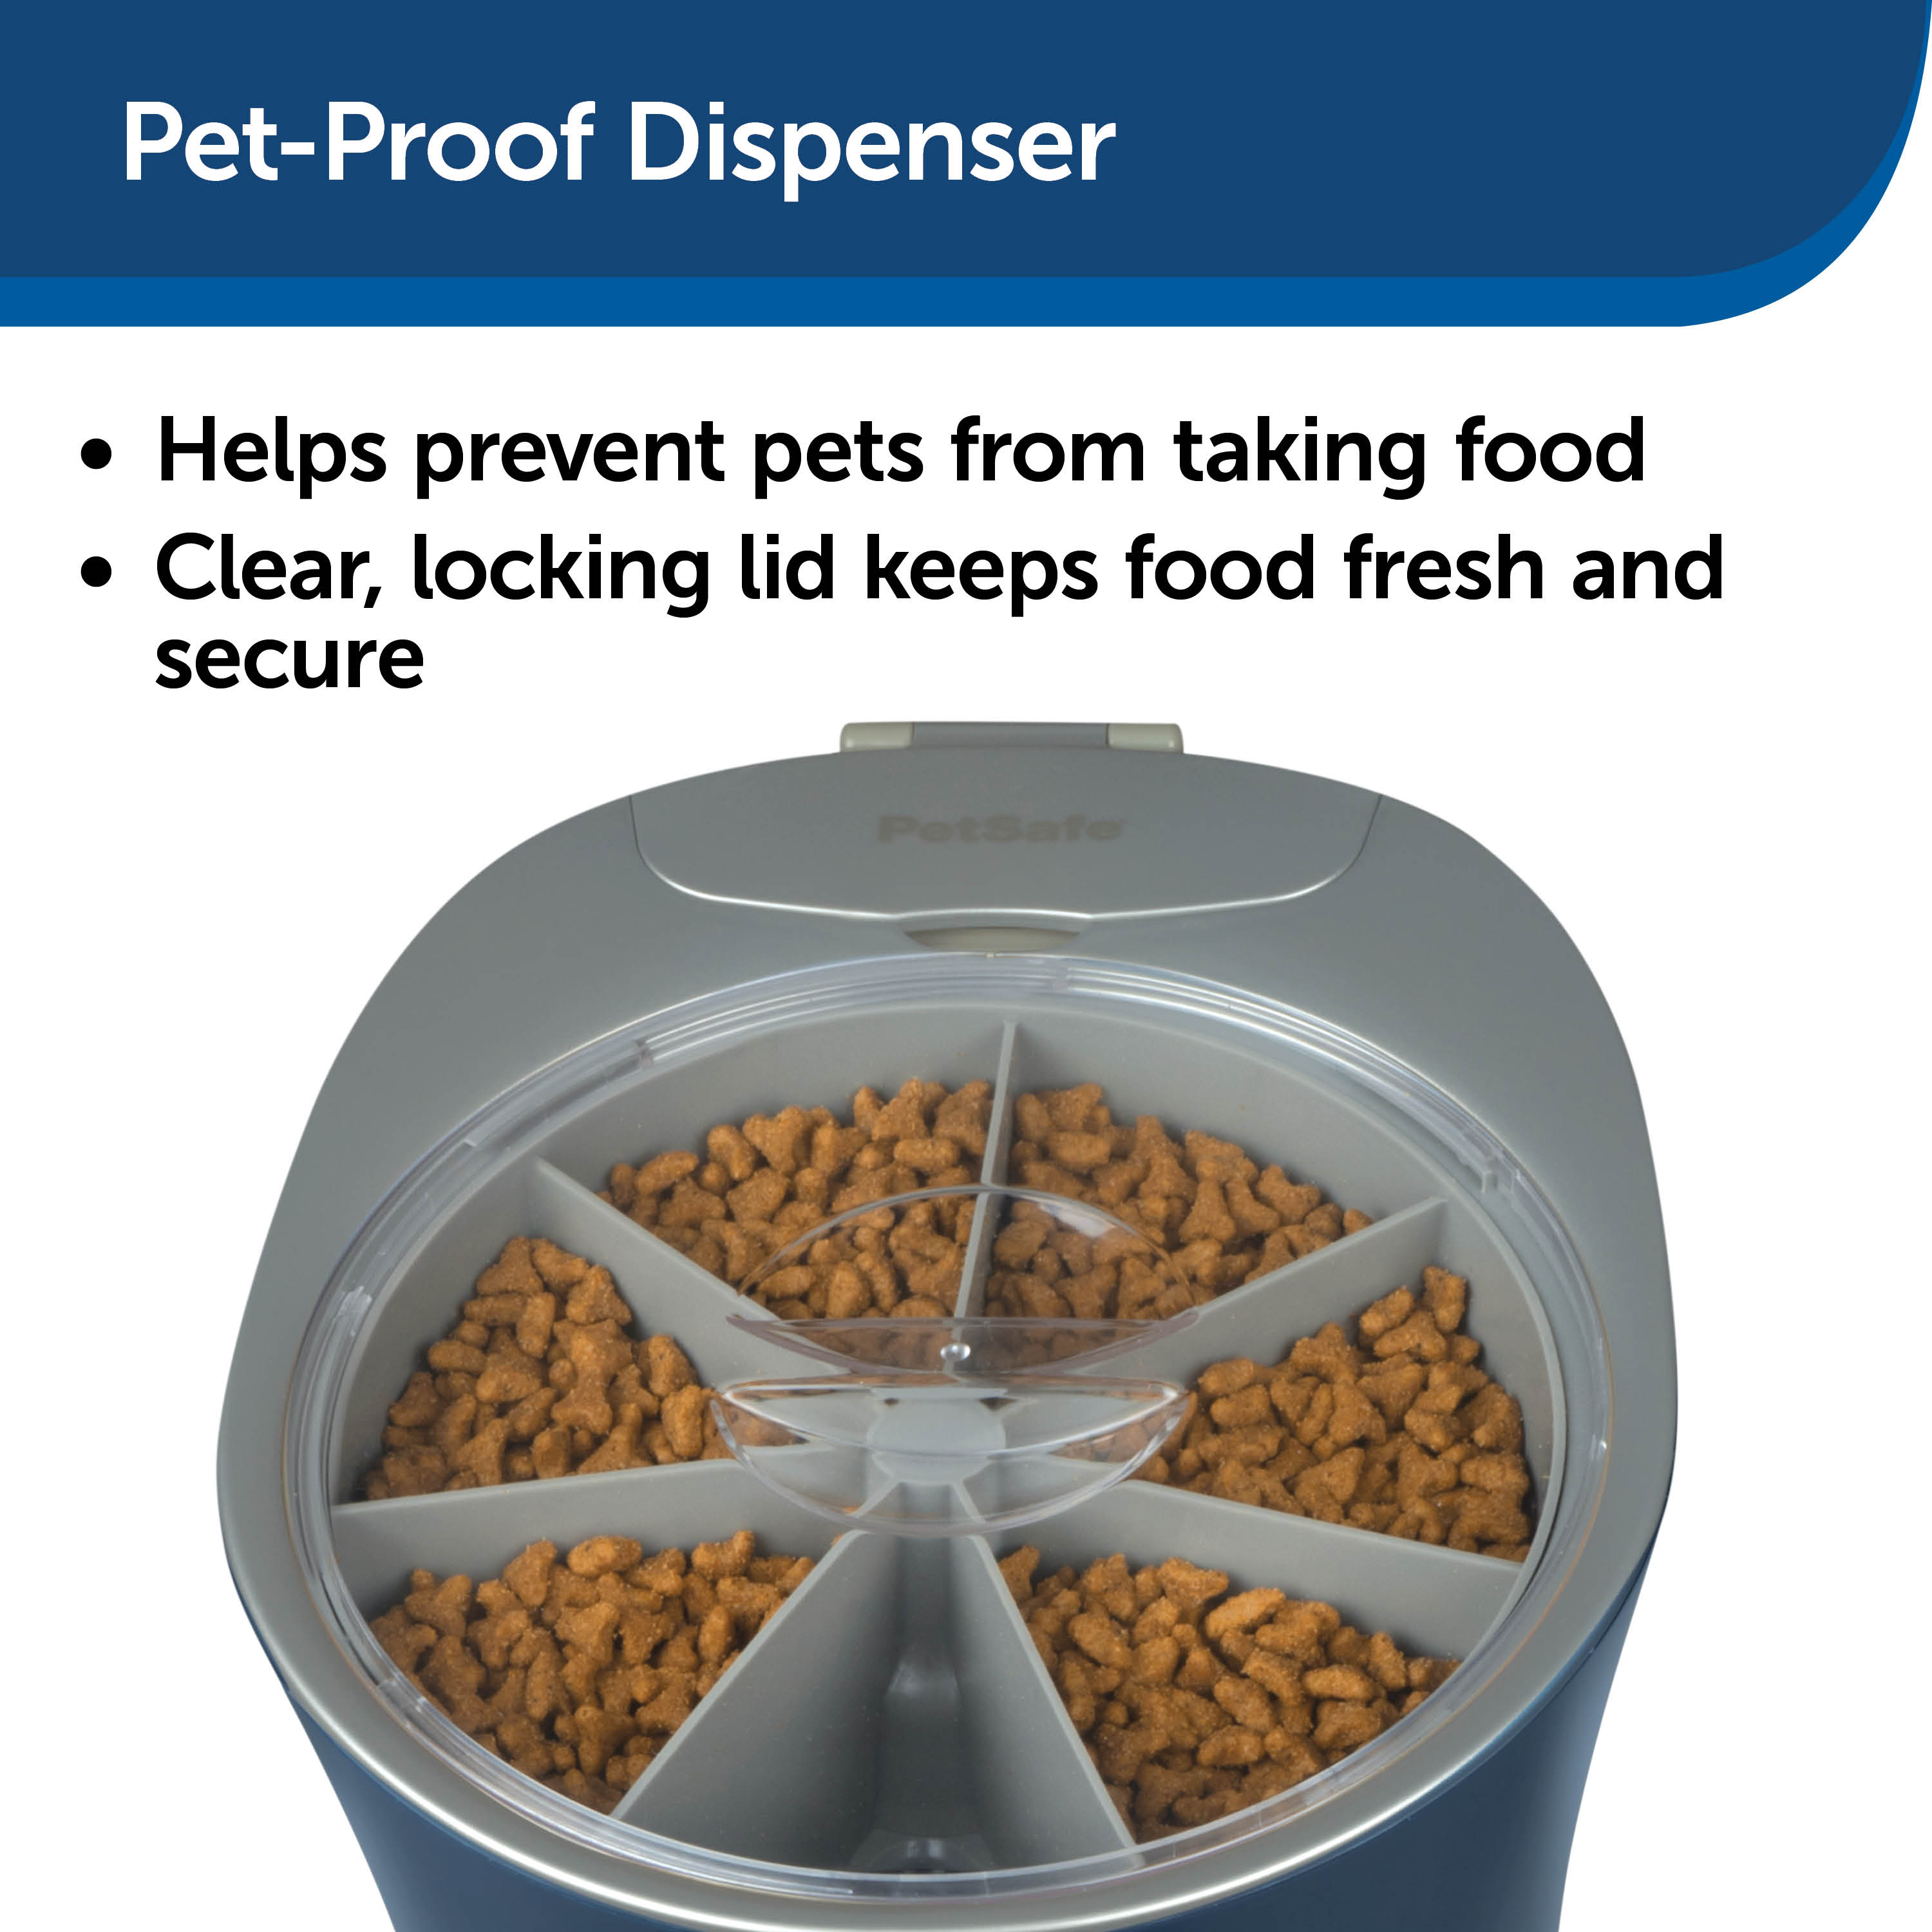 PetSafe 6 Meal Pet Feeder, Automatic Cat & Dog Feeder, 6 Cup Capacity - image 3 of 7